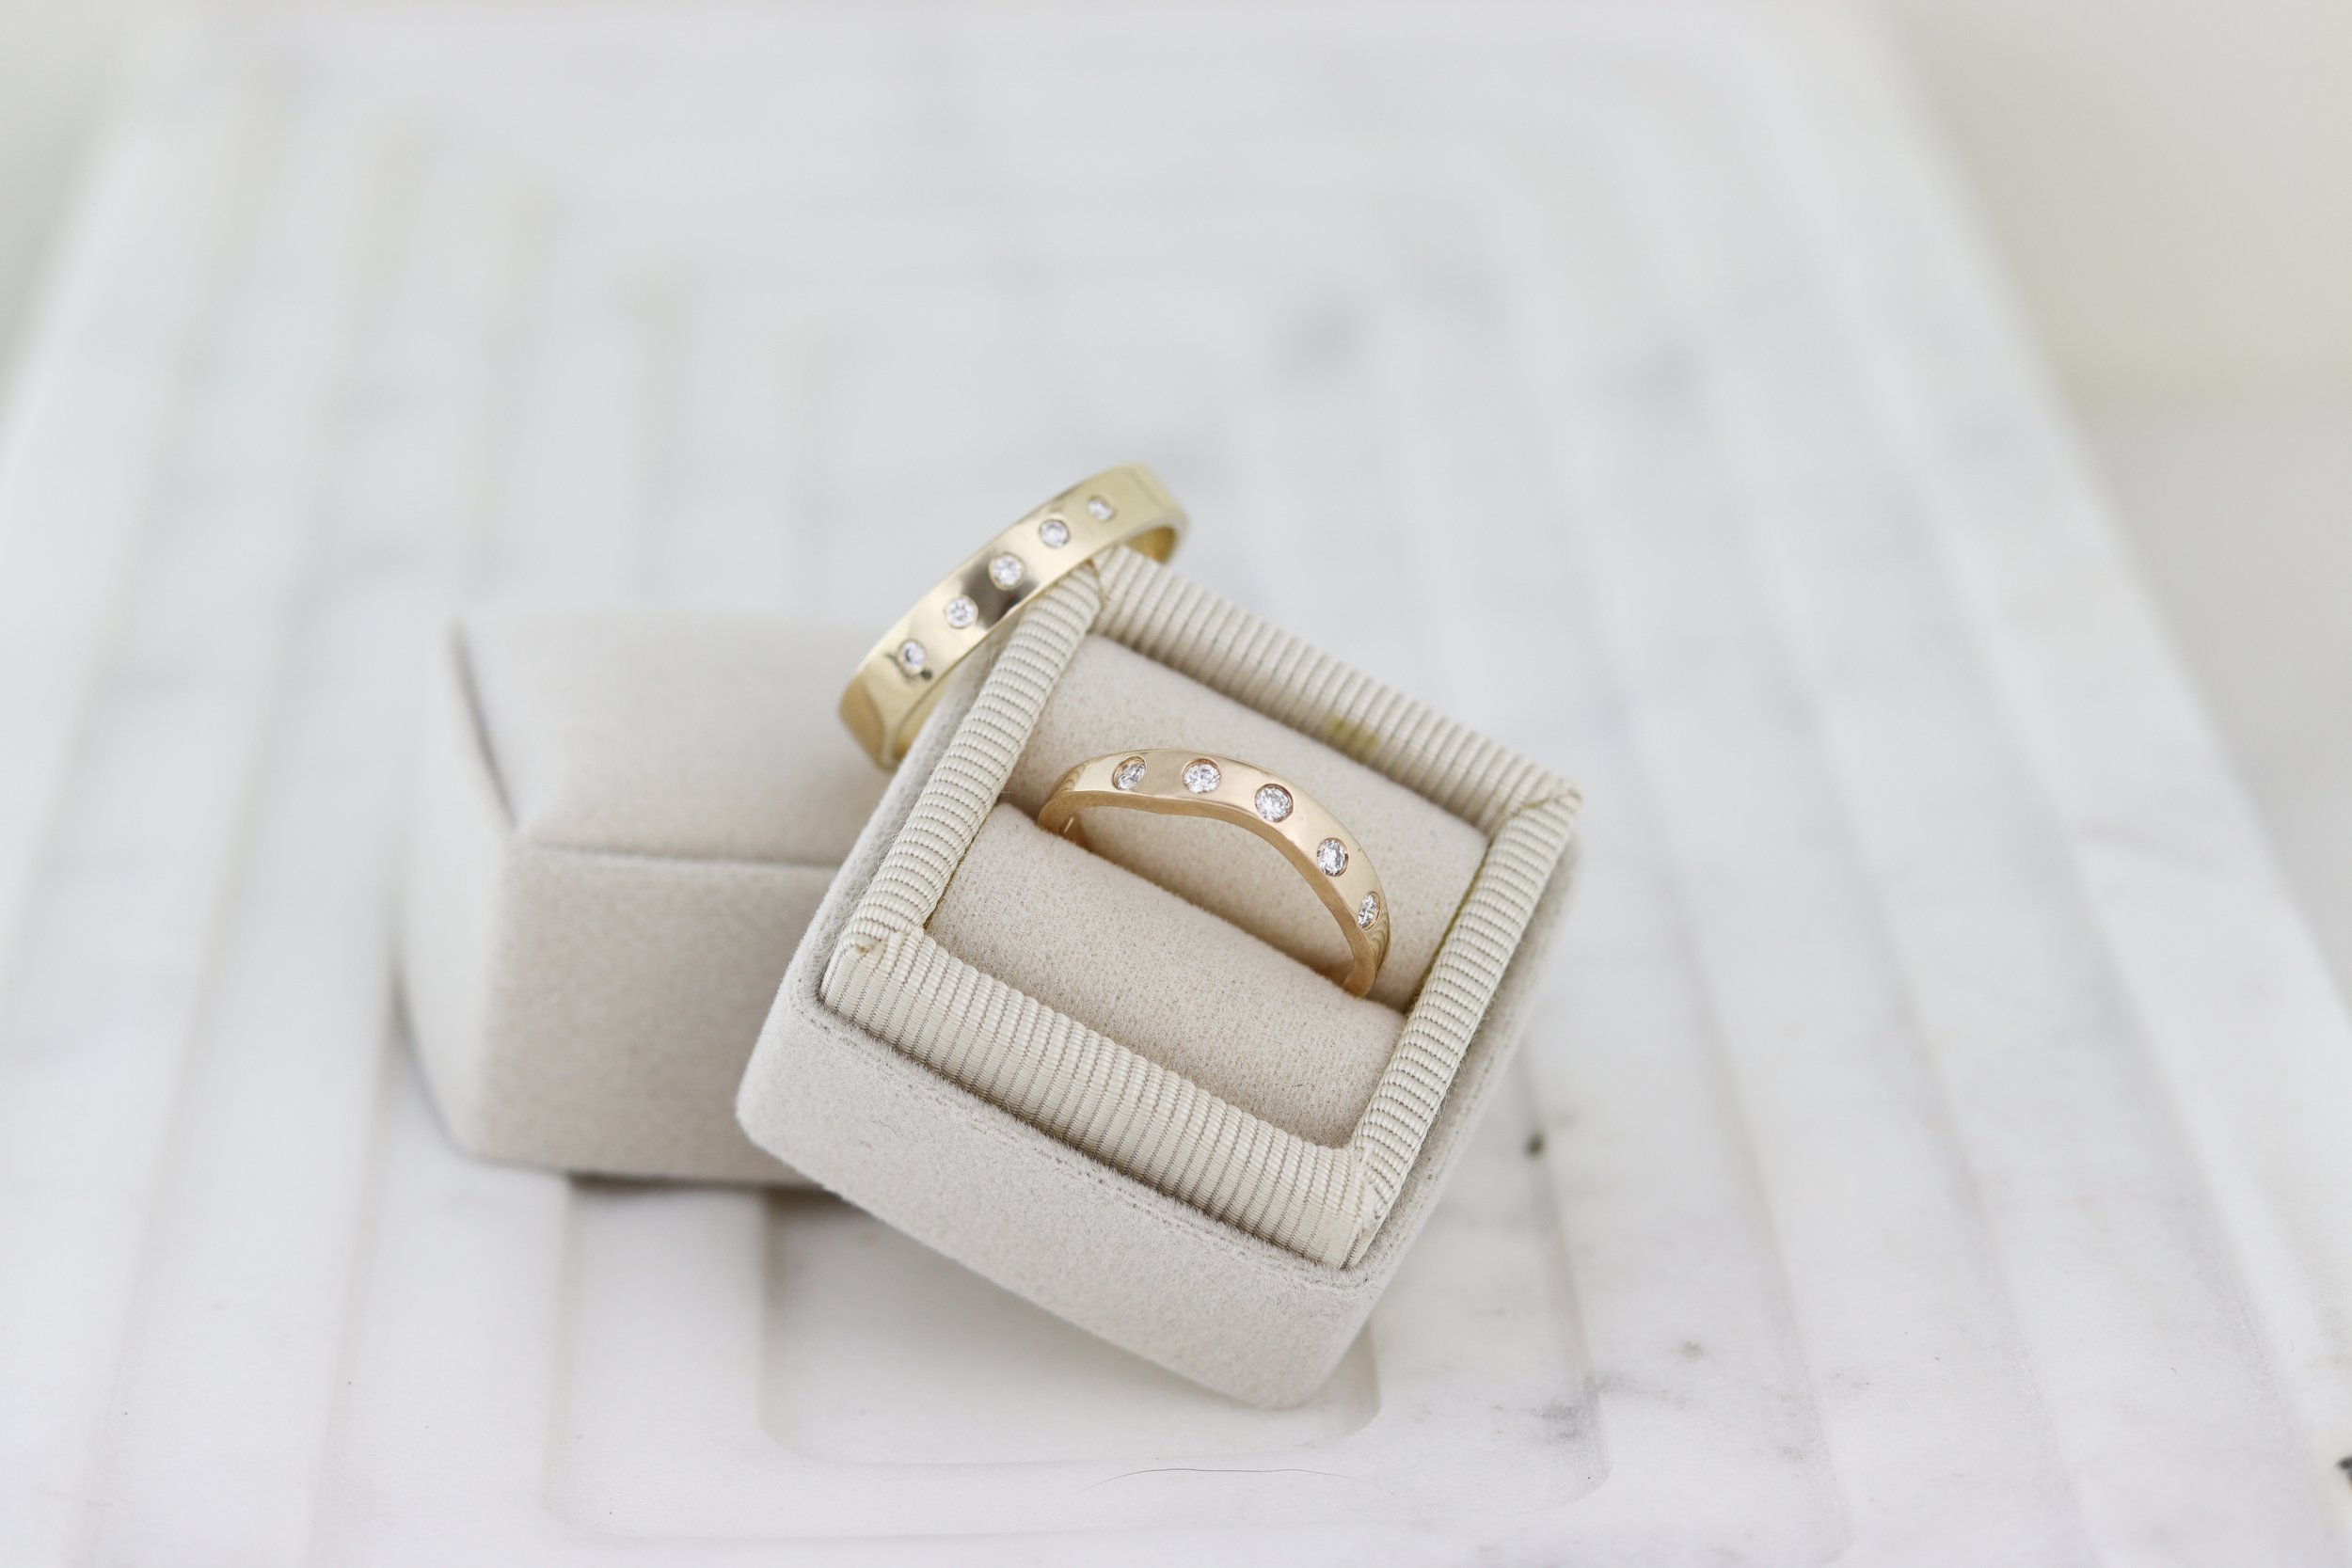 flush set diamond bands his and hers